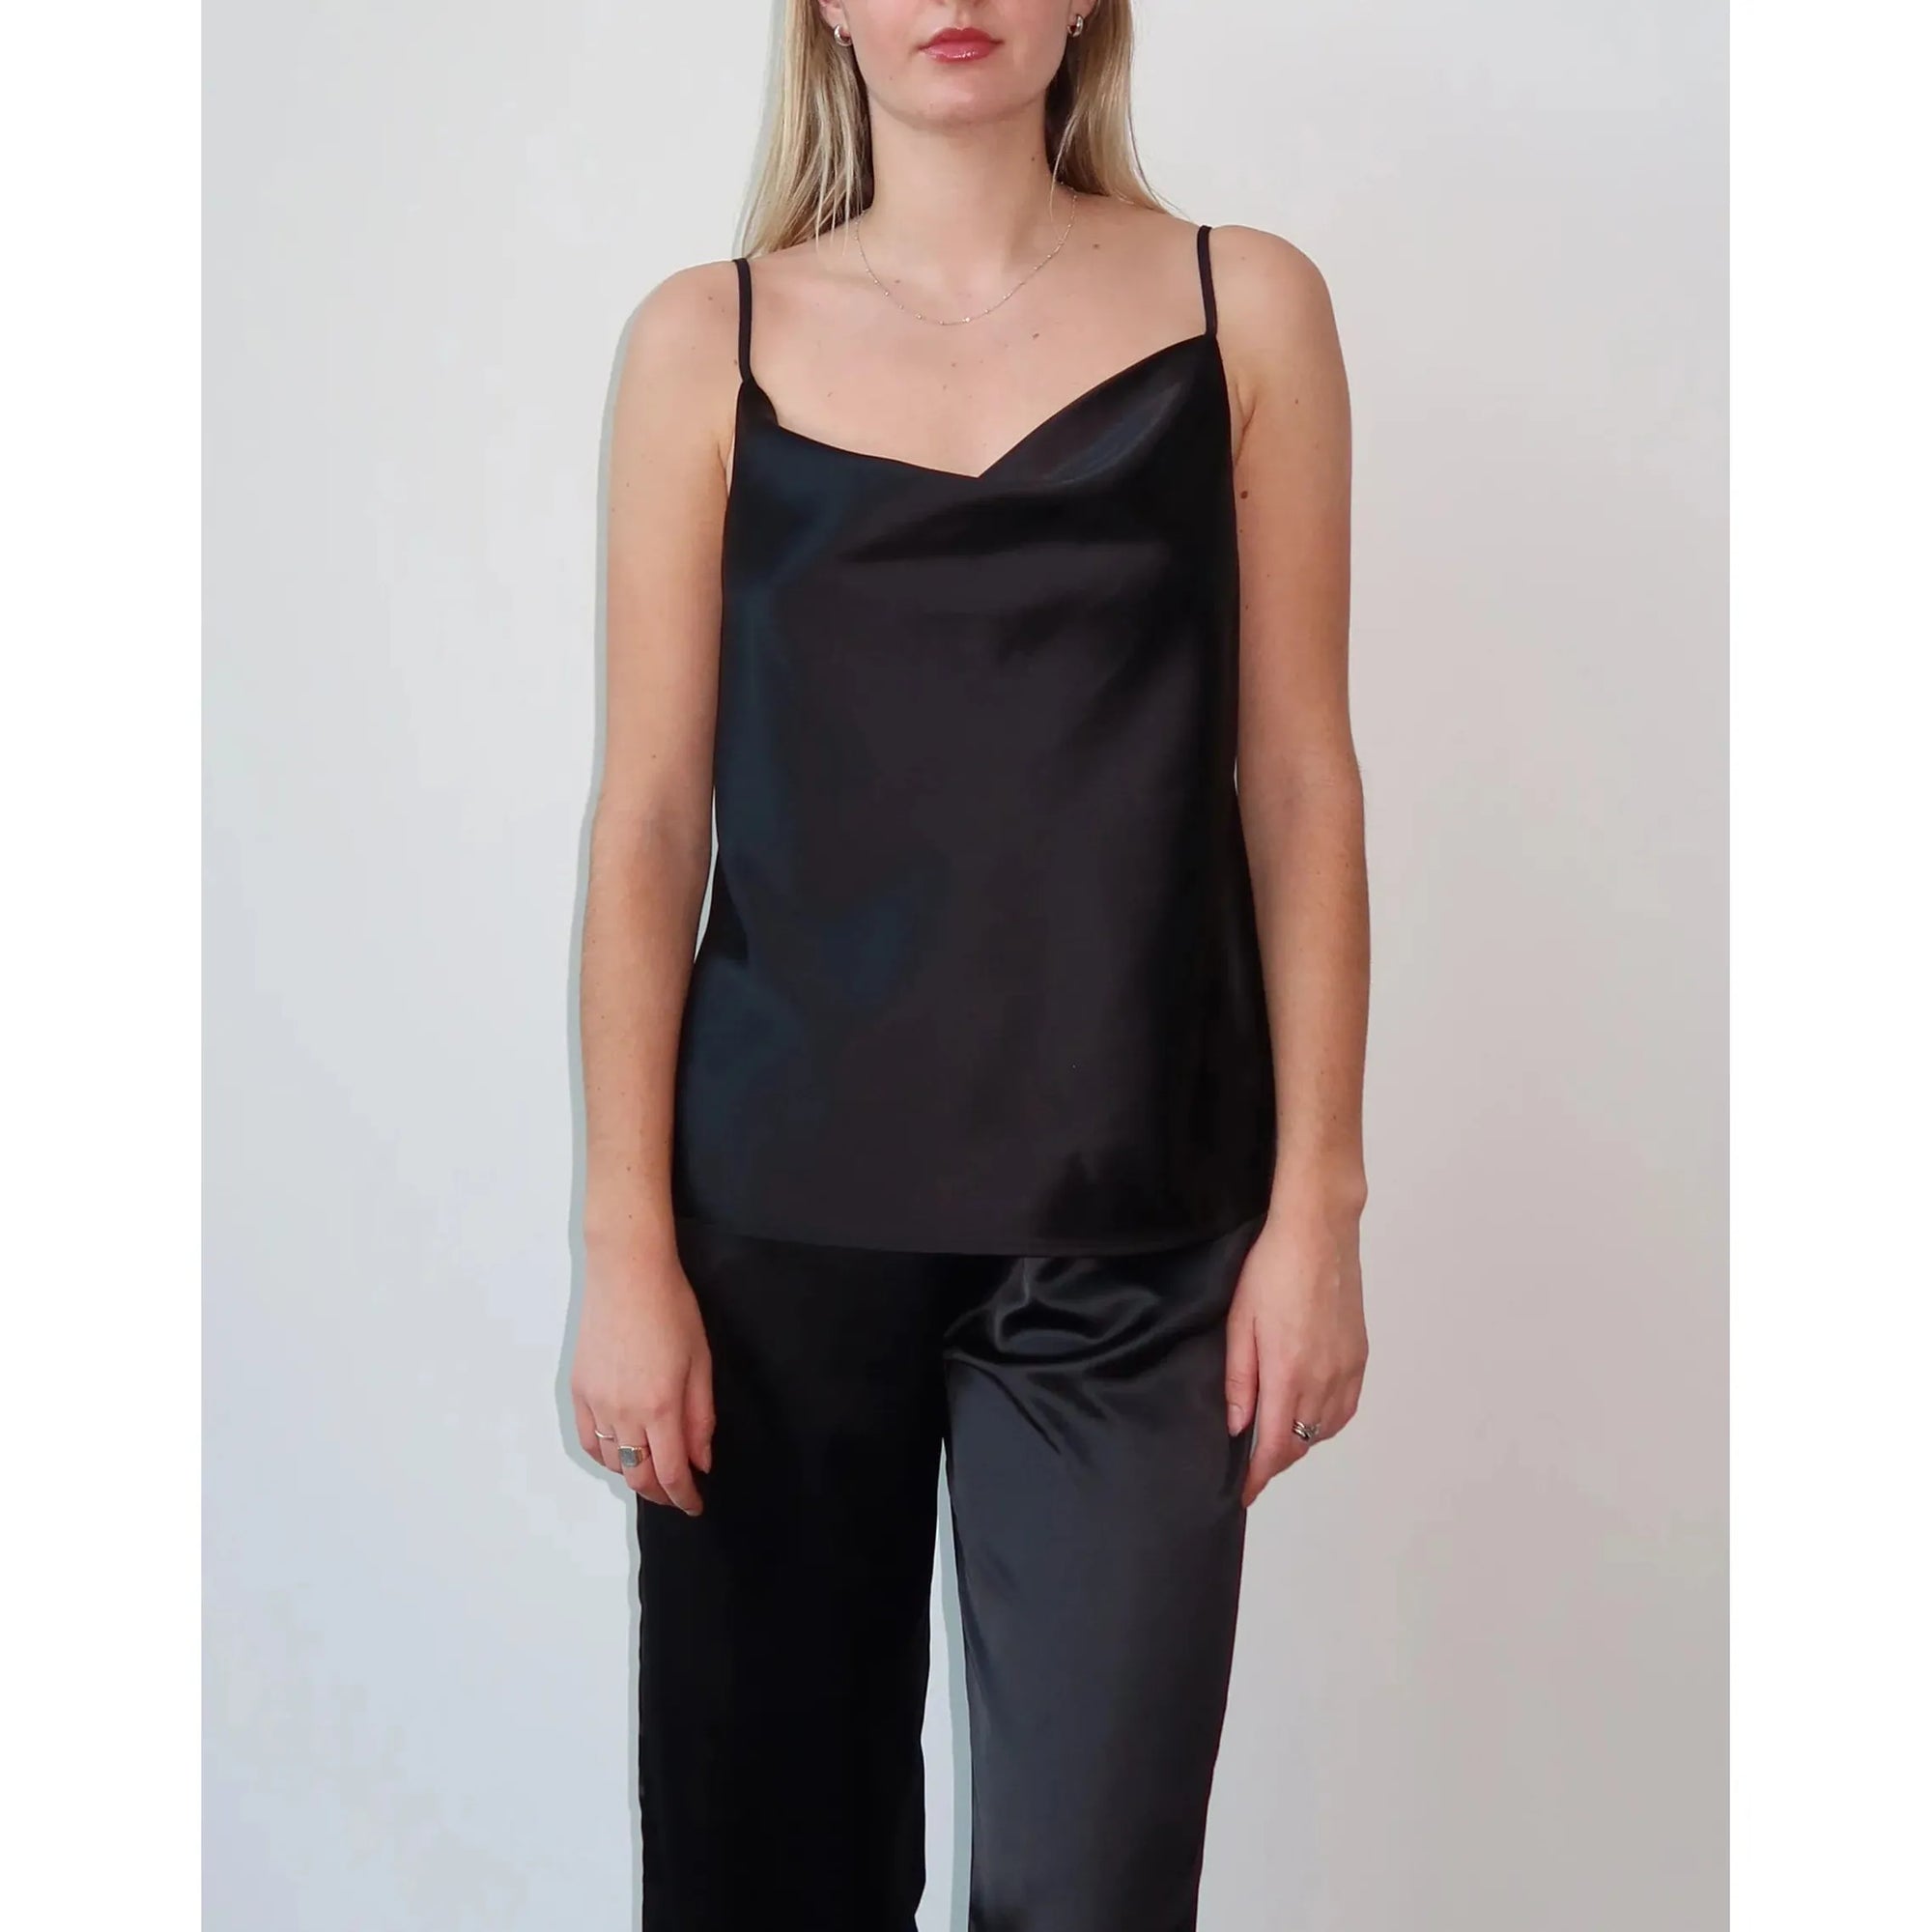 Brunette the Label Black / XS-S Brunette the Label Carrie Satin Camisole